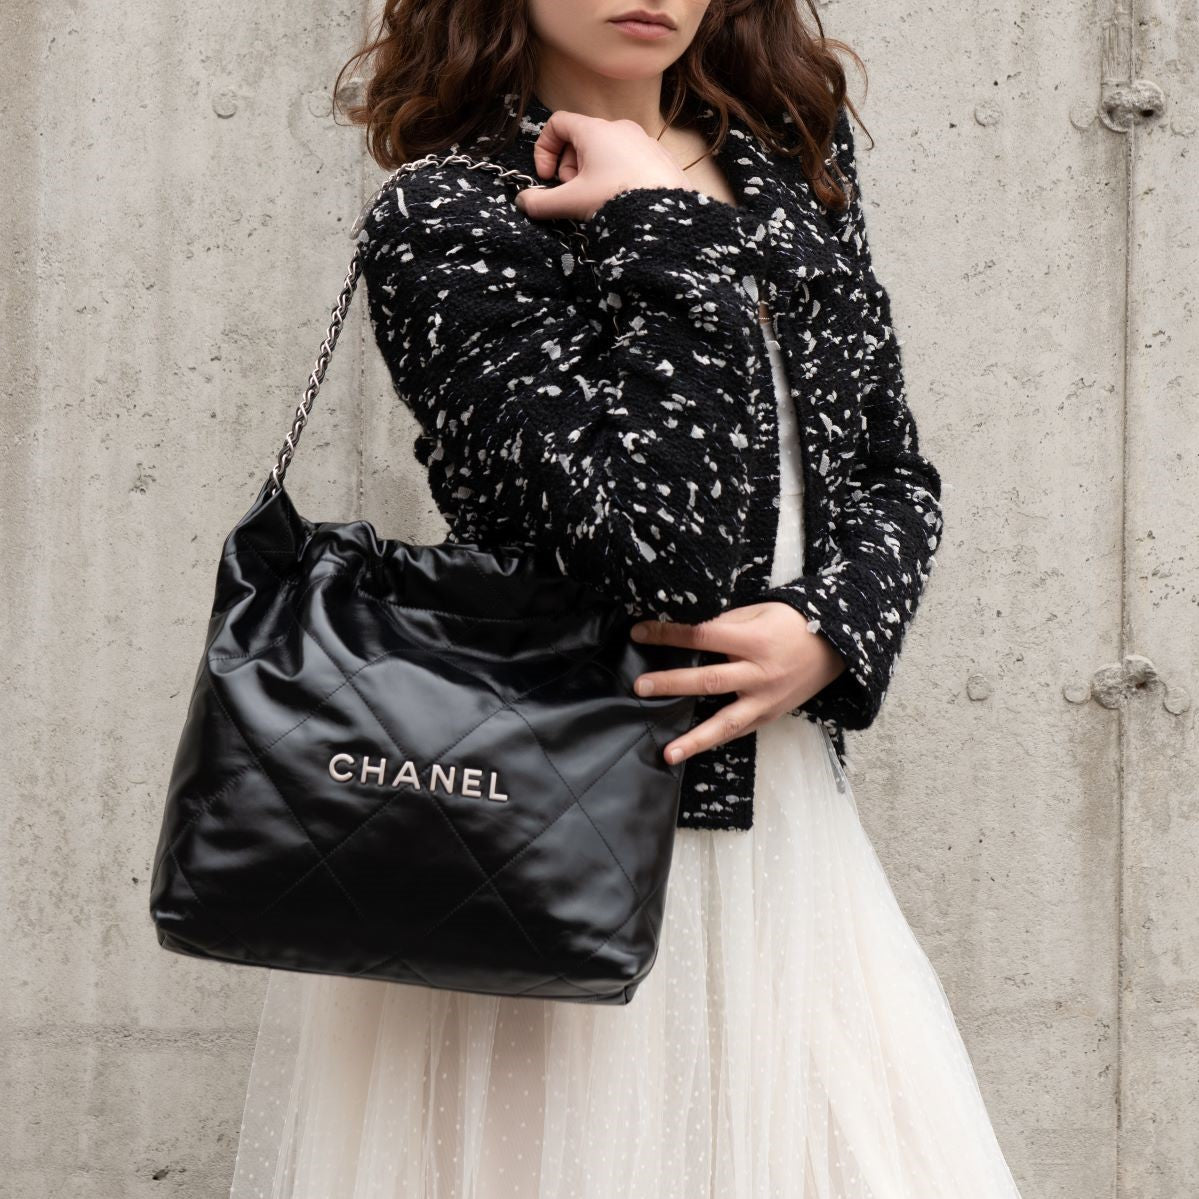 Chanel Black Shiny Calfskin Quilted Small Chanel 22 Bag – Love that Bag etc  - Preowned Designer Fashions